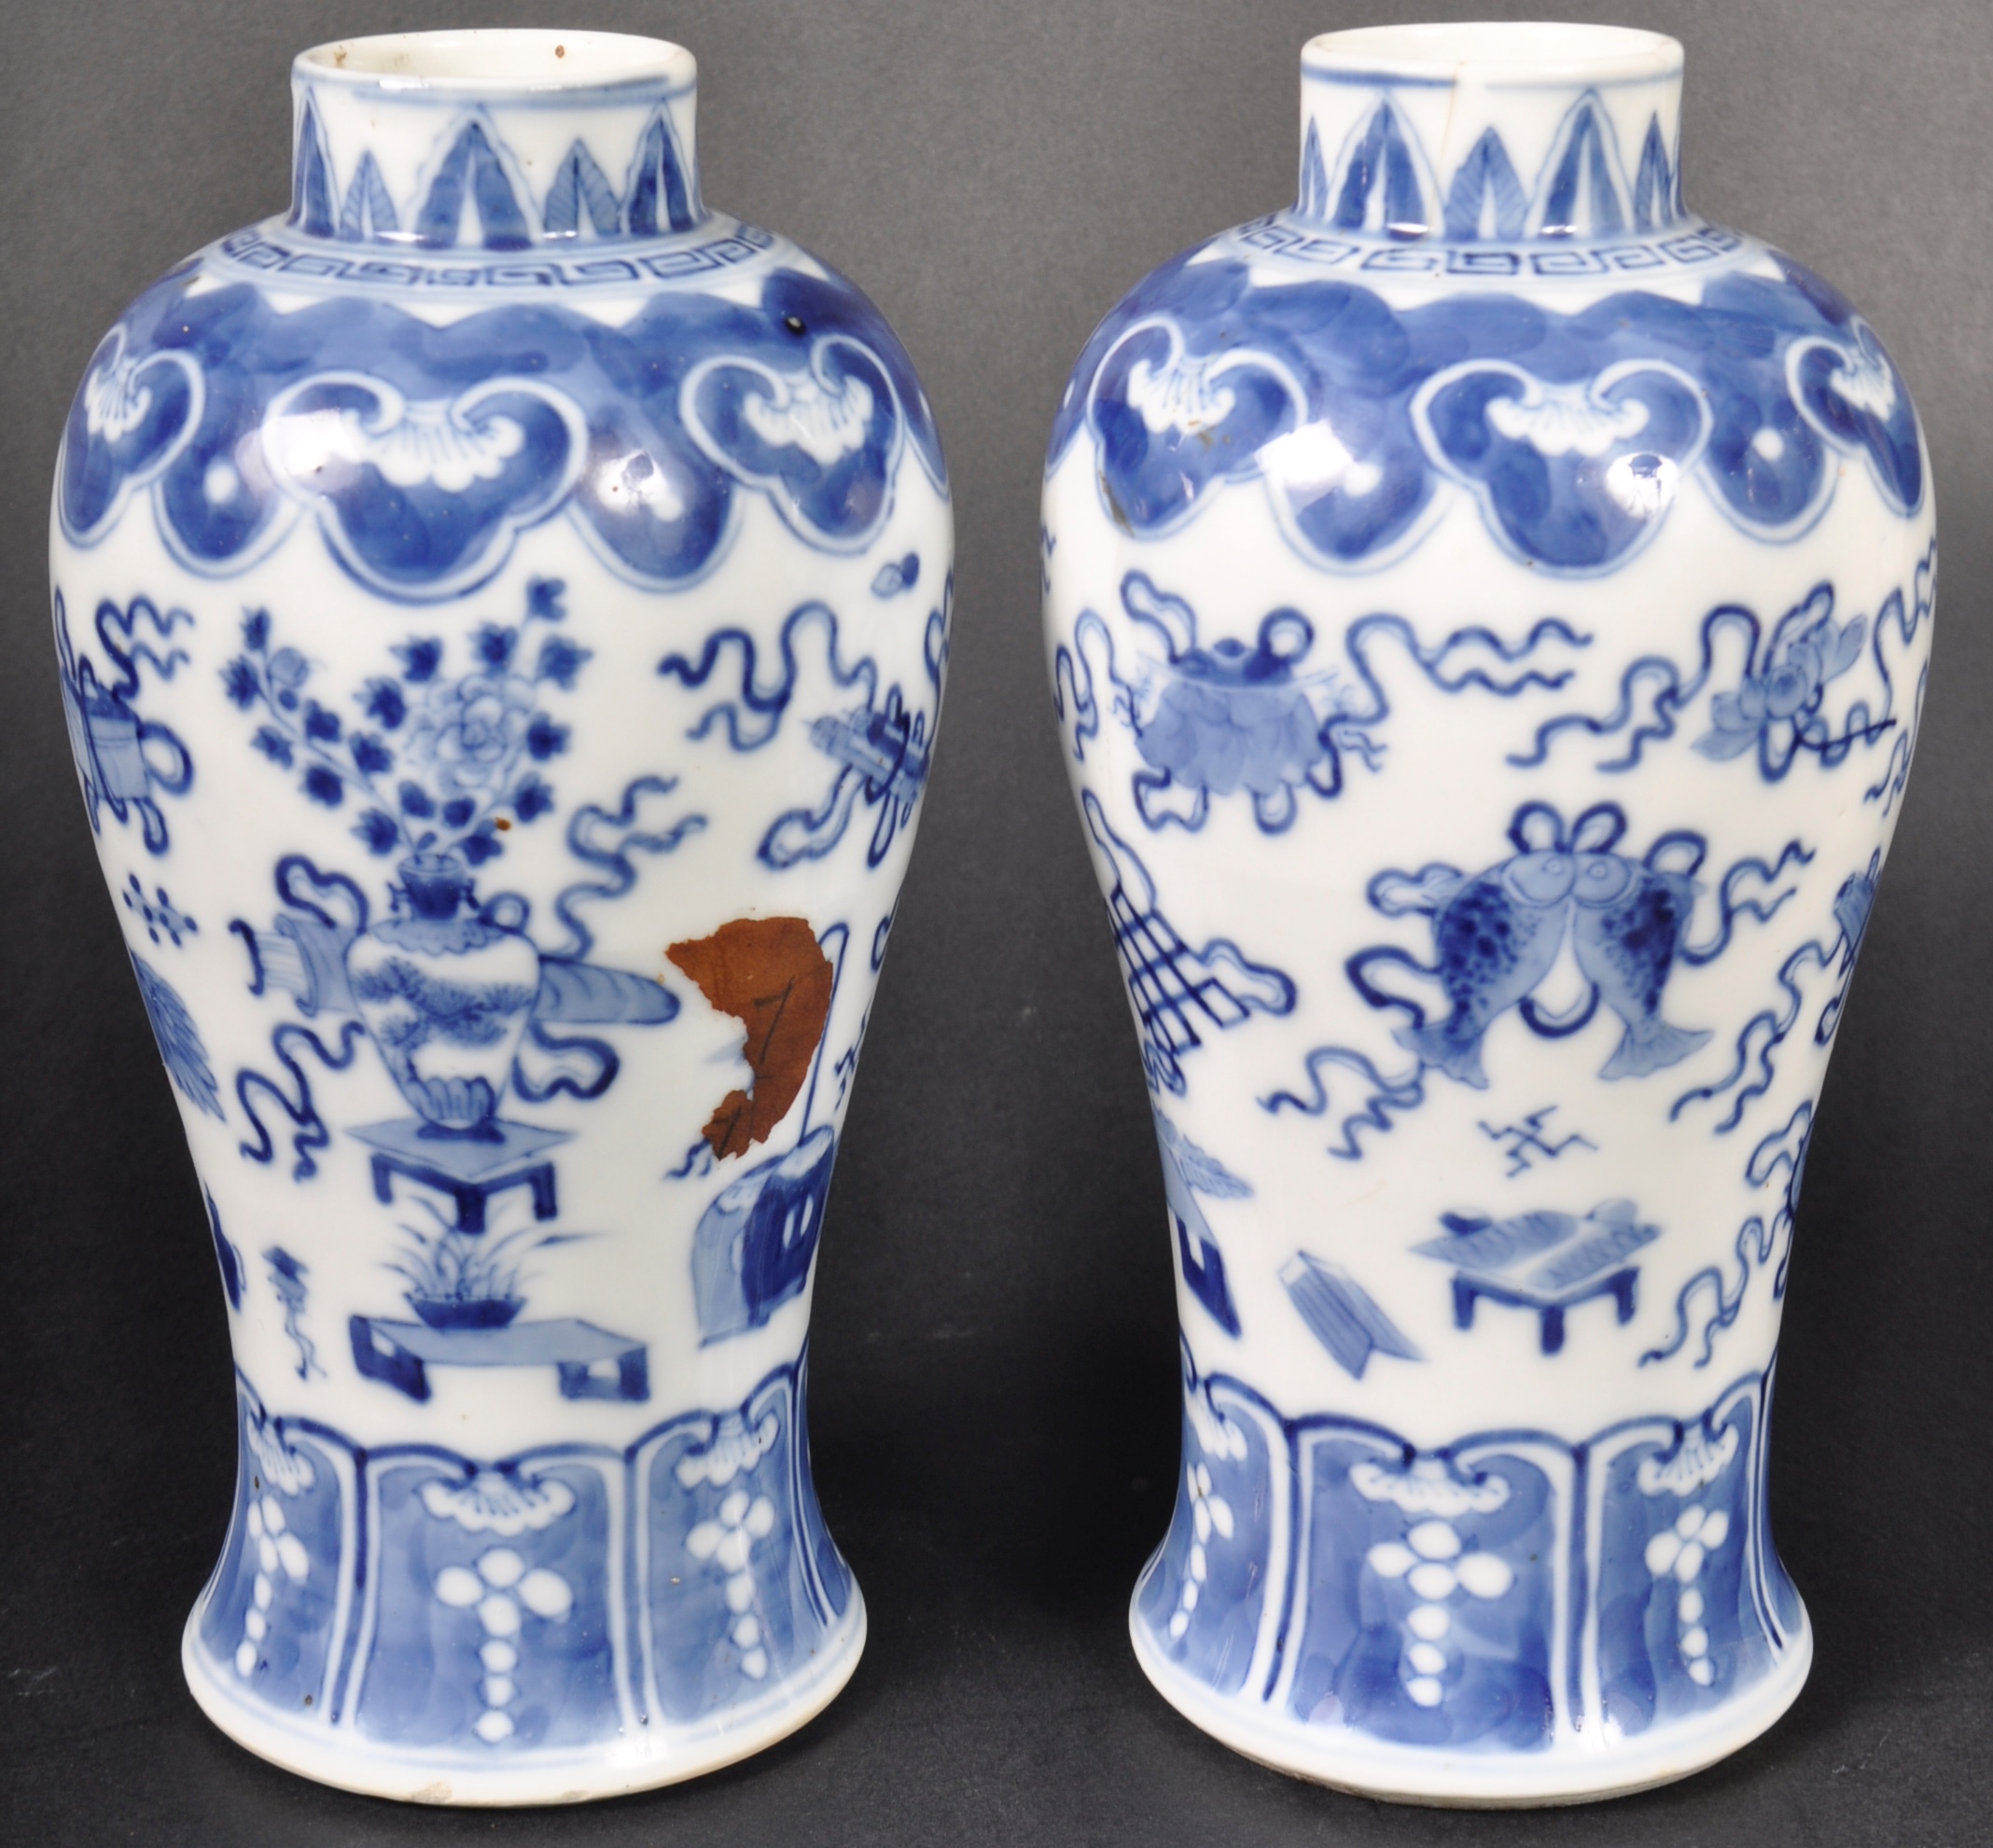 PAIR OF 19TH CENTURY CHINESE KANGXI MARK PRECIOUS OBJECT VASES - Image 9 of 11